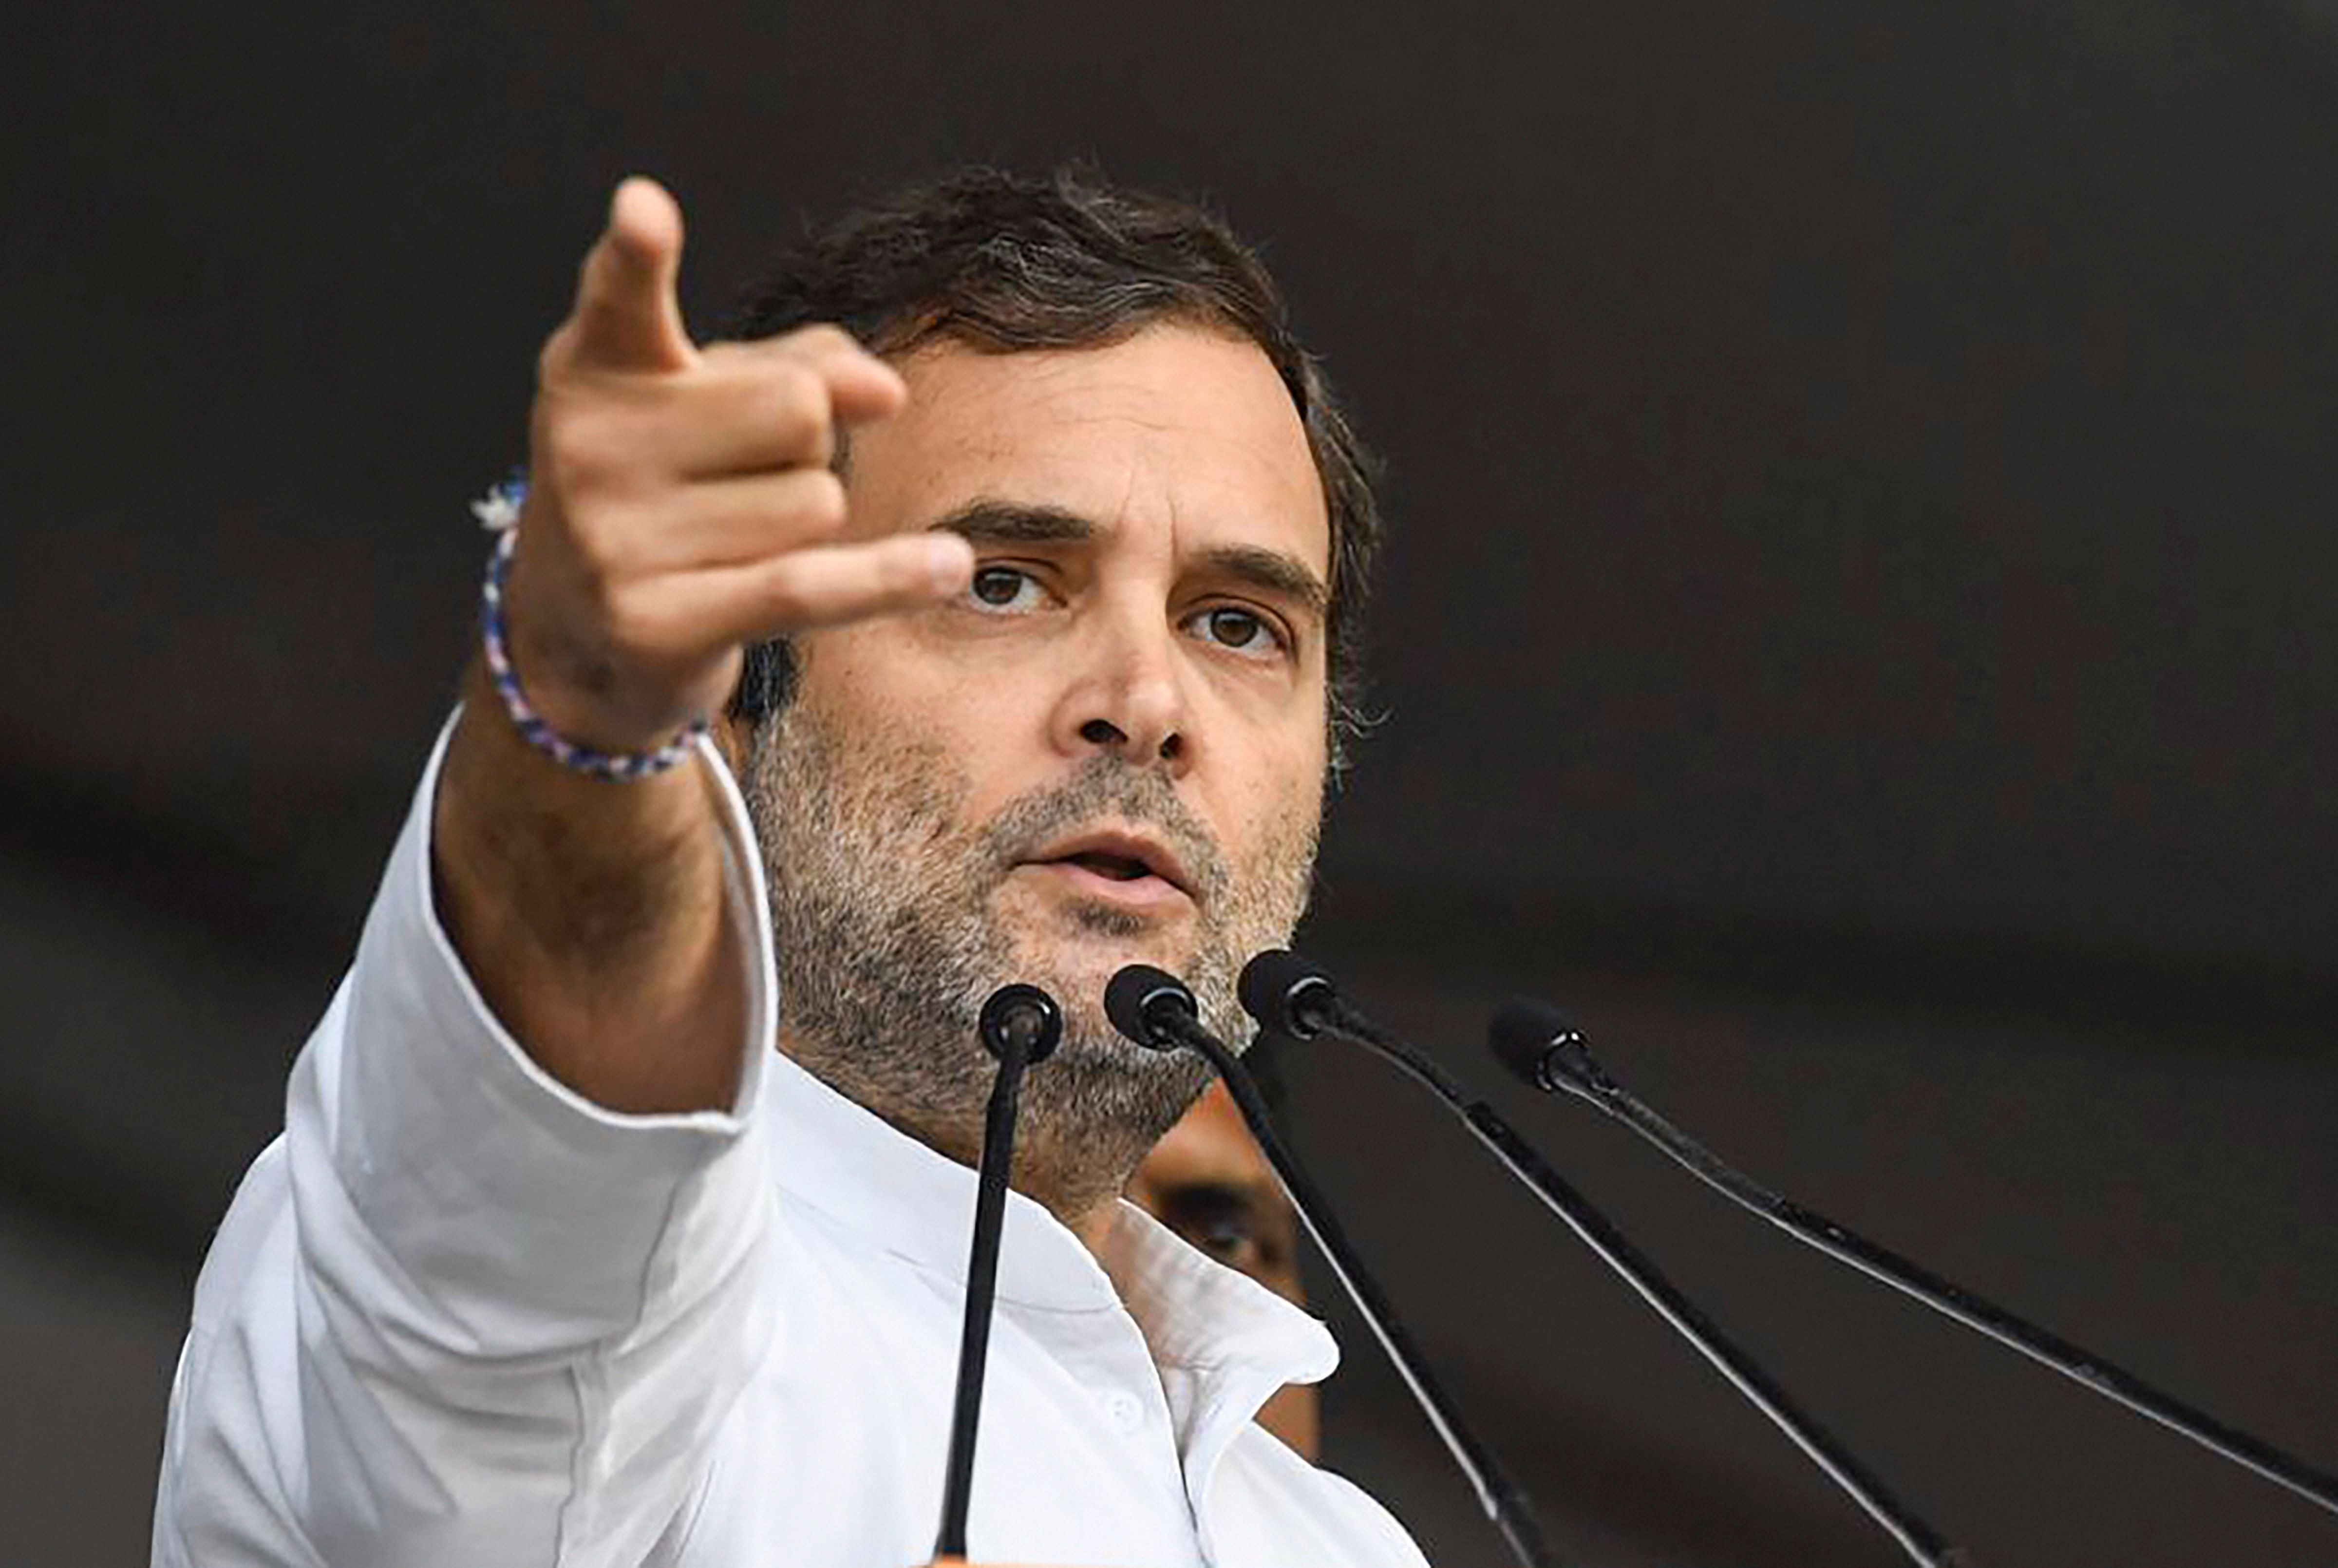 Congress leader Rahul Gandhi addresses the party workers during the party's 'Bharat Bachao' rally at Ramlila Maidan in New Delhi. (PTI Photo)